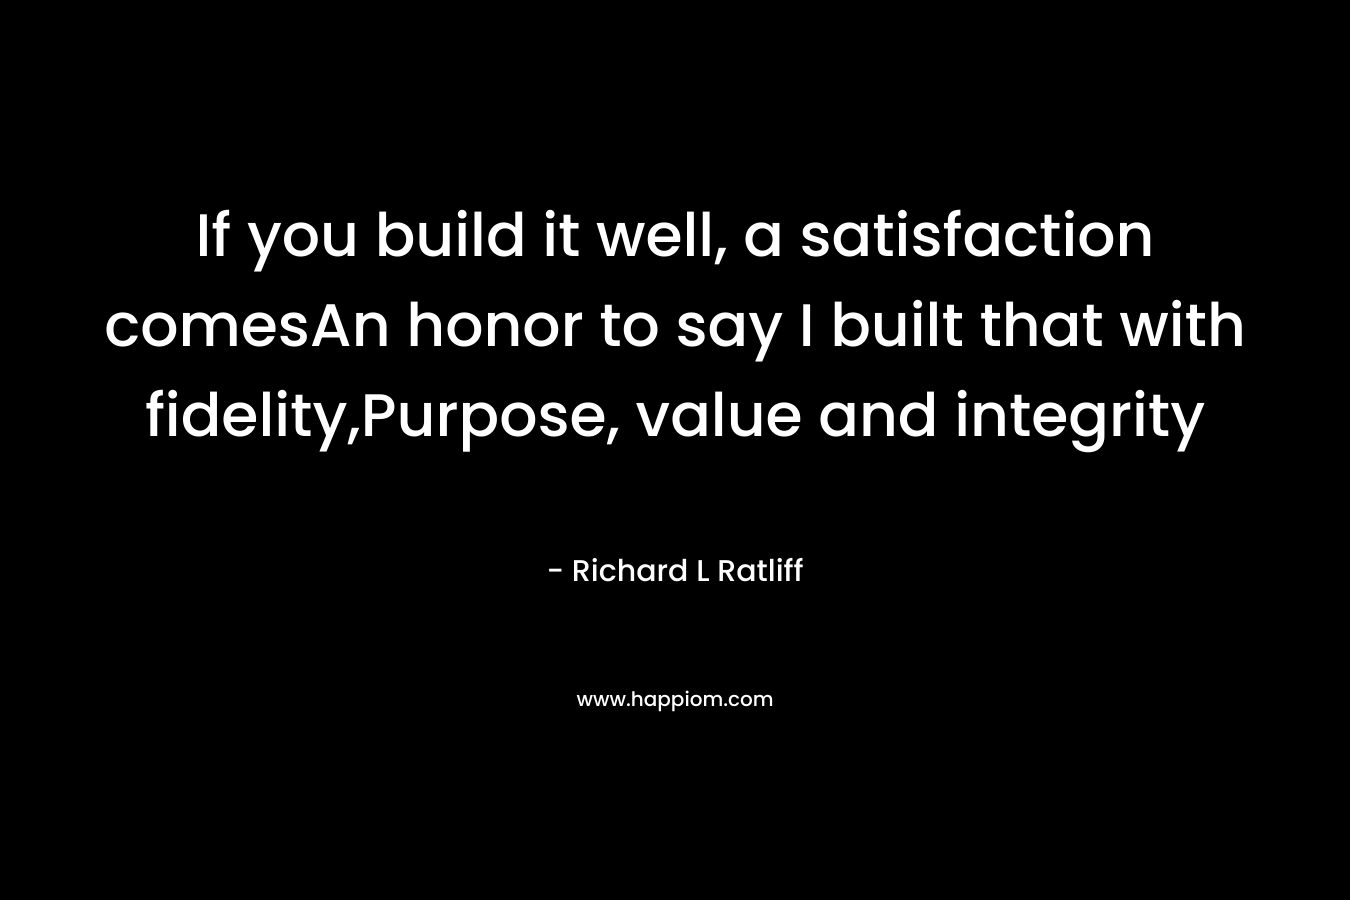 If you build it well, a satisfaction comesAn honor to say I built that with fidelity,Purpose, value and integrity